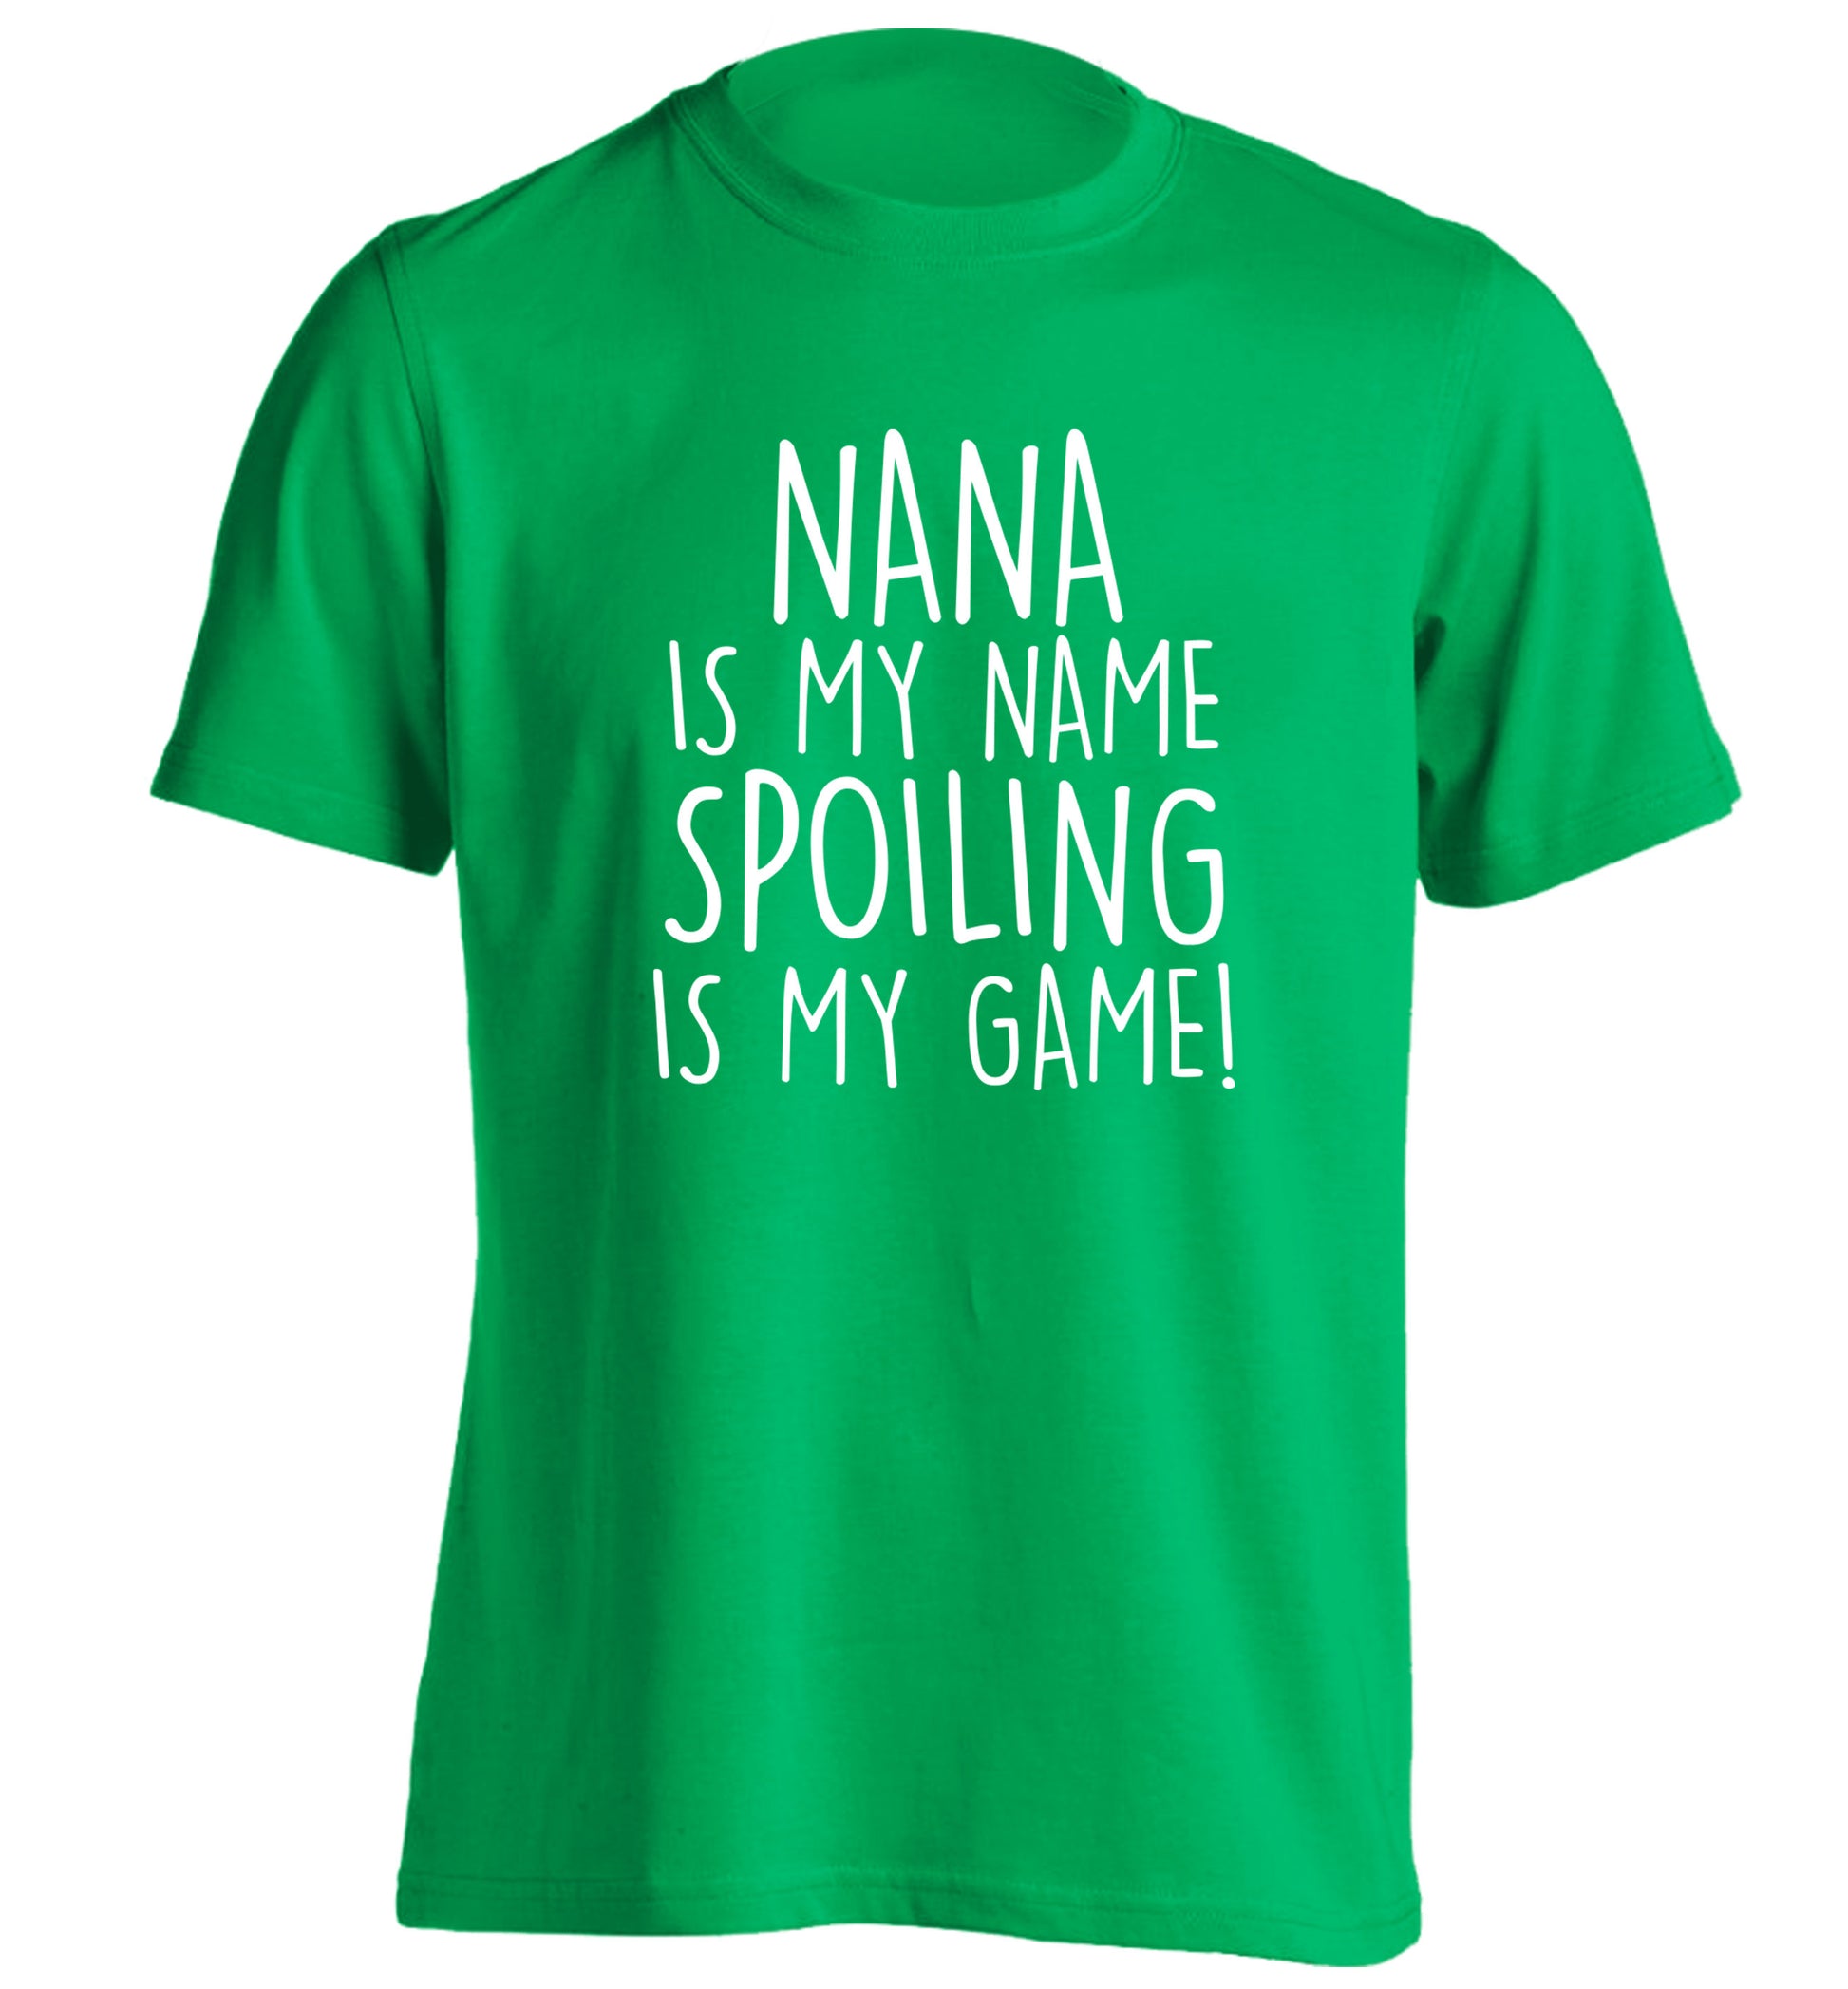 Nana is my name, spoiling is my game adults unisex green Tshirt 2XL